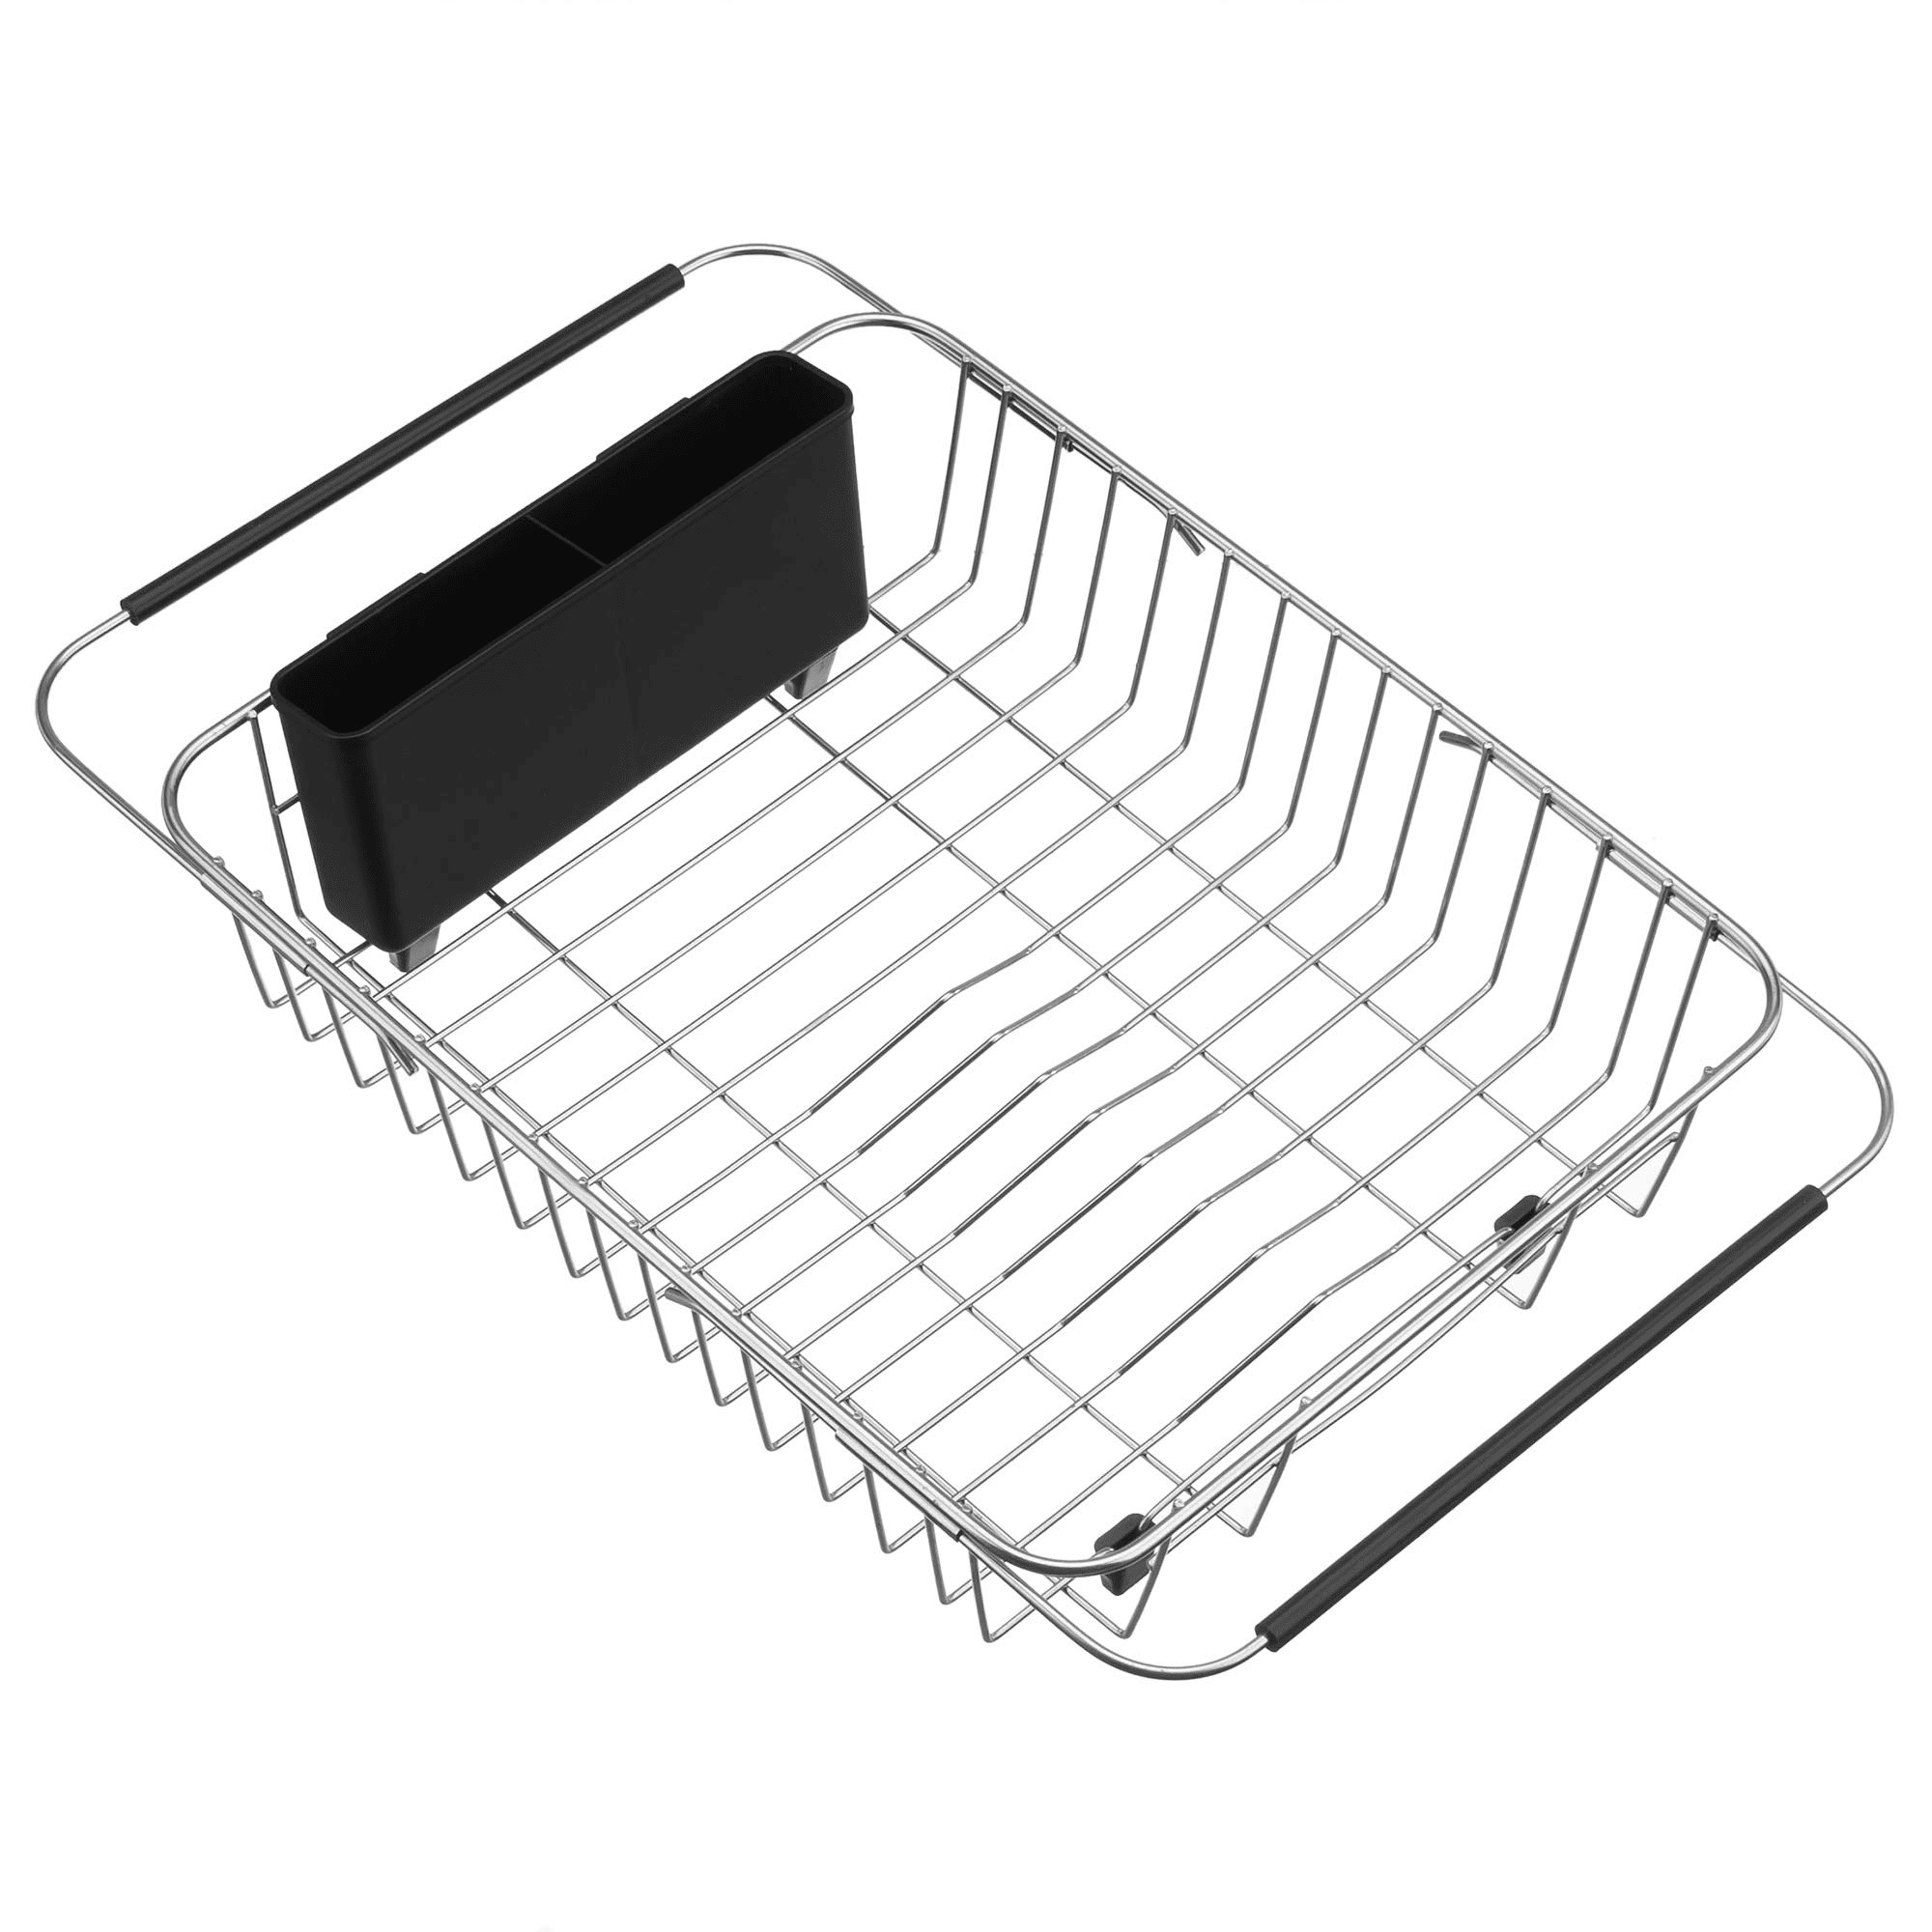 Eassemrack Sink Dish Drying Rack, 304 Stainless Steel Rustproof Expandable Dish Drainer Organizer with Stainless Steel Silverware Holder Over Inside